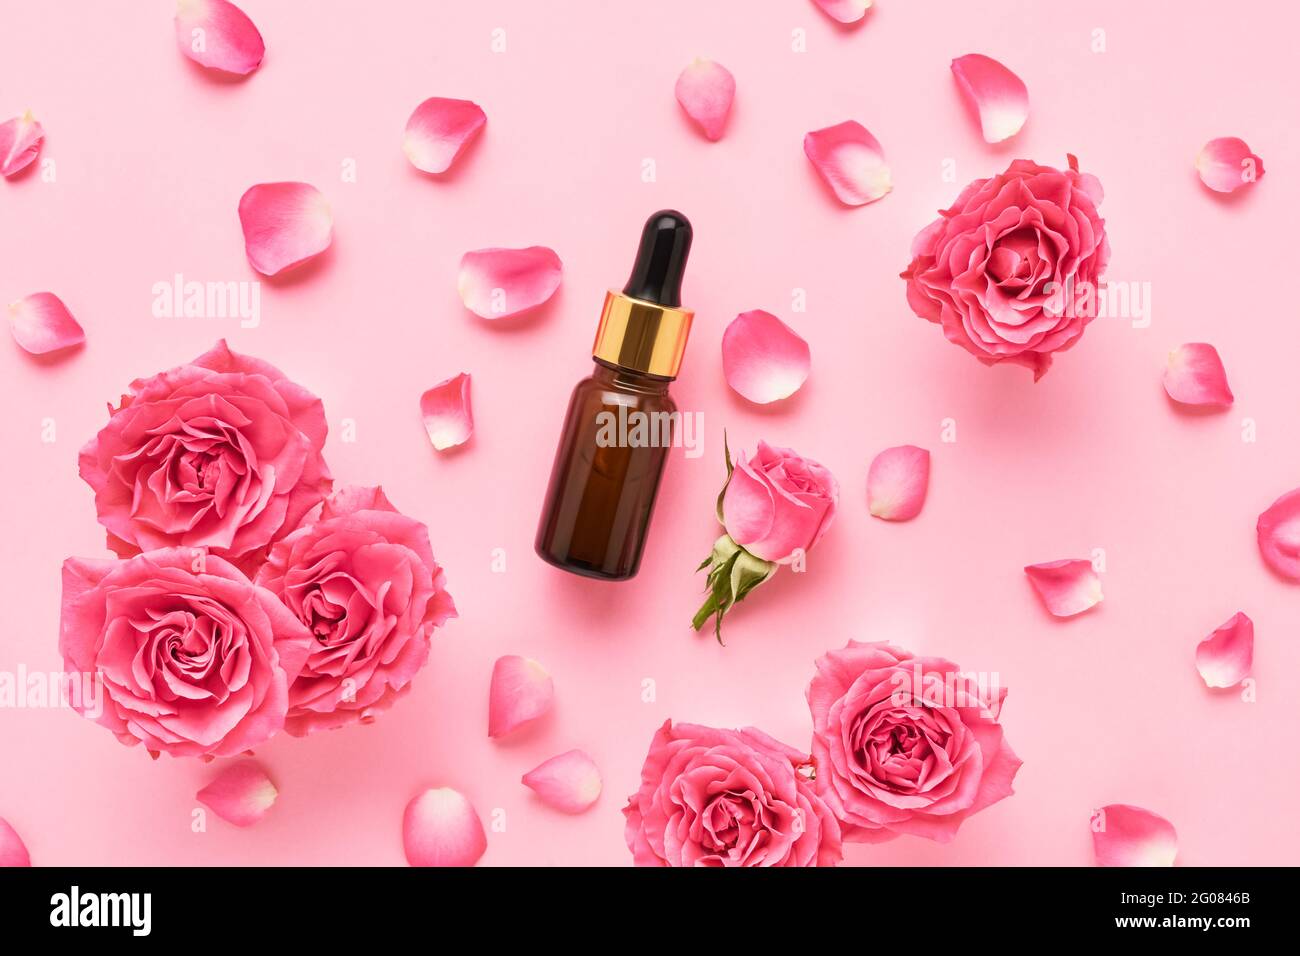 Brown glass dropper bottle for medical and cosmetic use and pink roses on a pink background. SPA concept. Top view, copy space for text Stock Photo